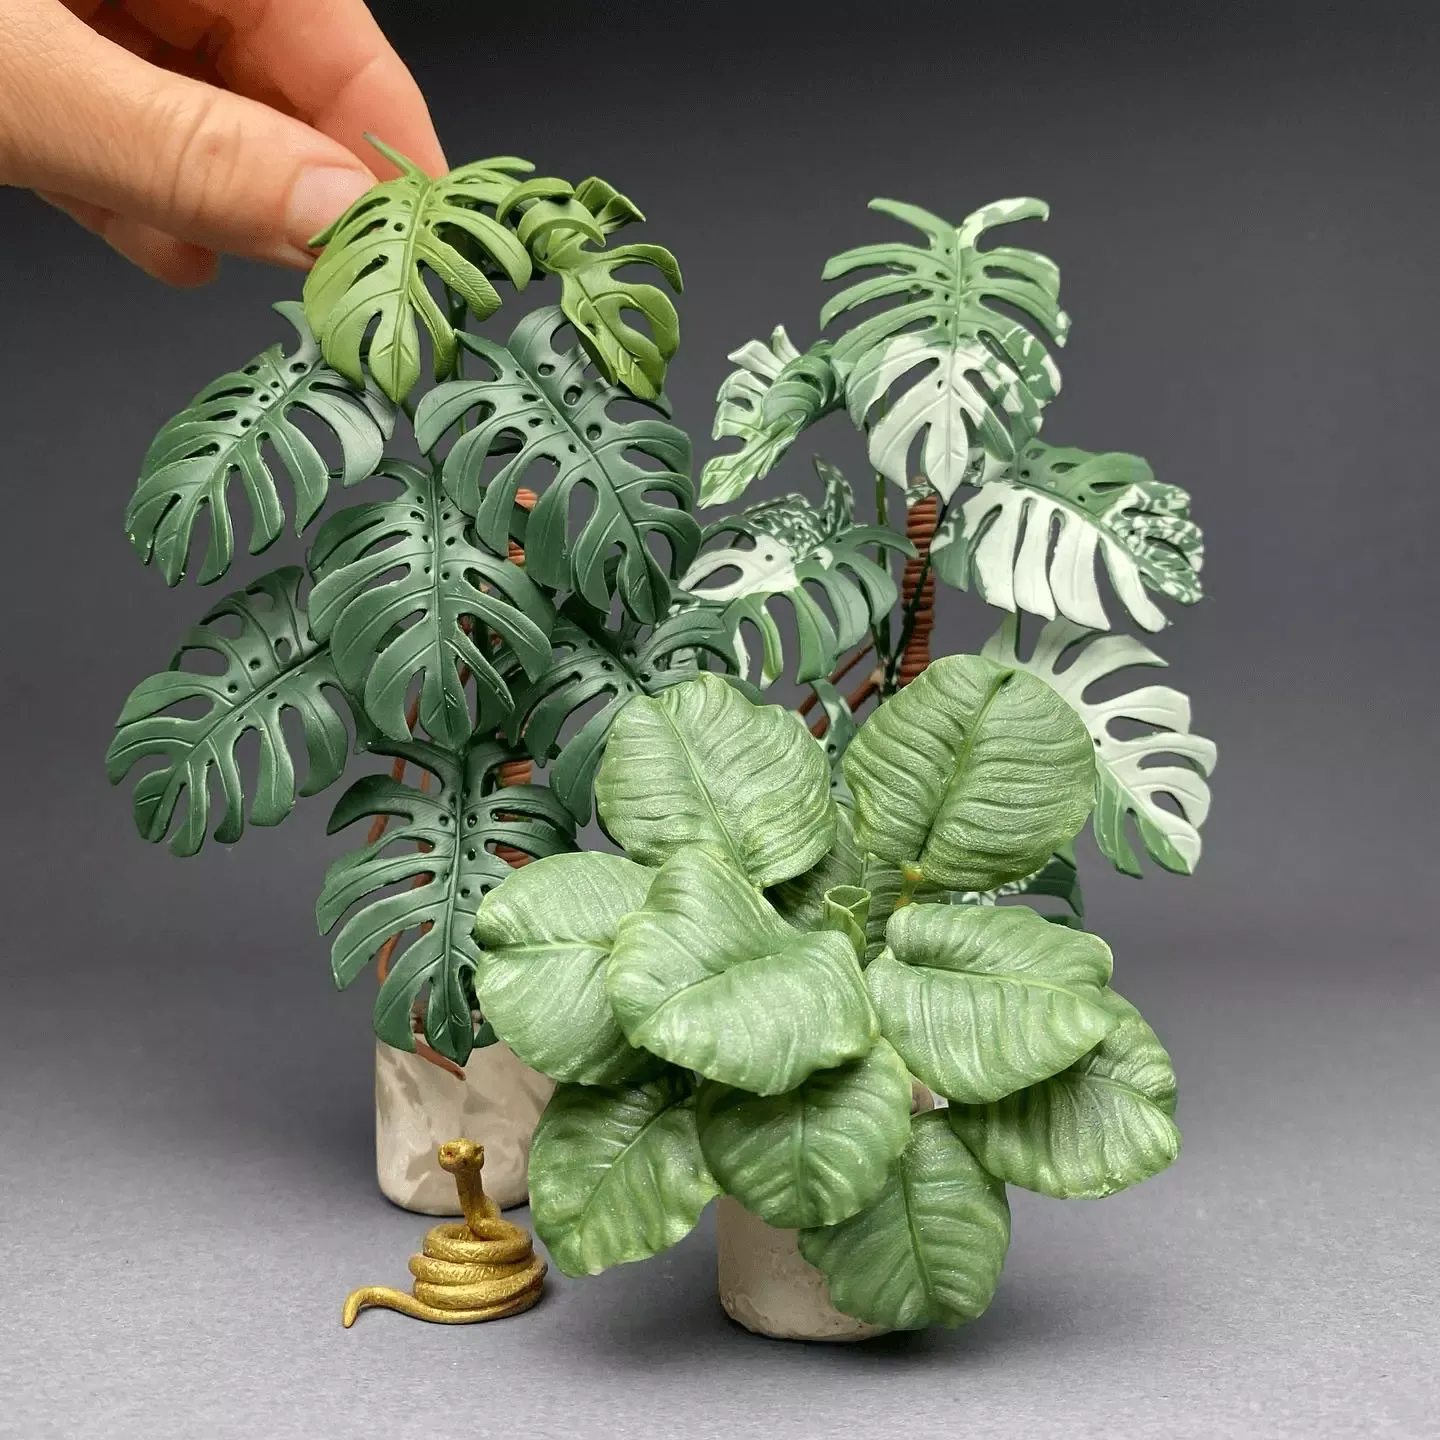 You will fall in love with these miniature plants!